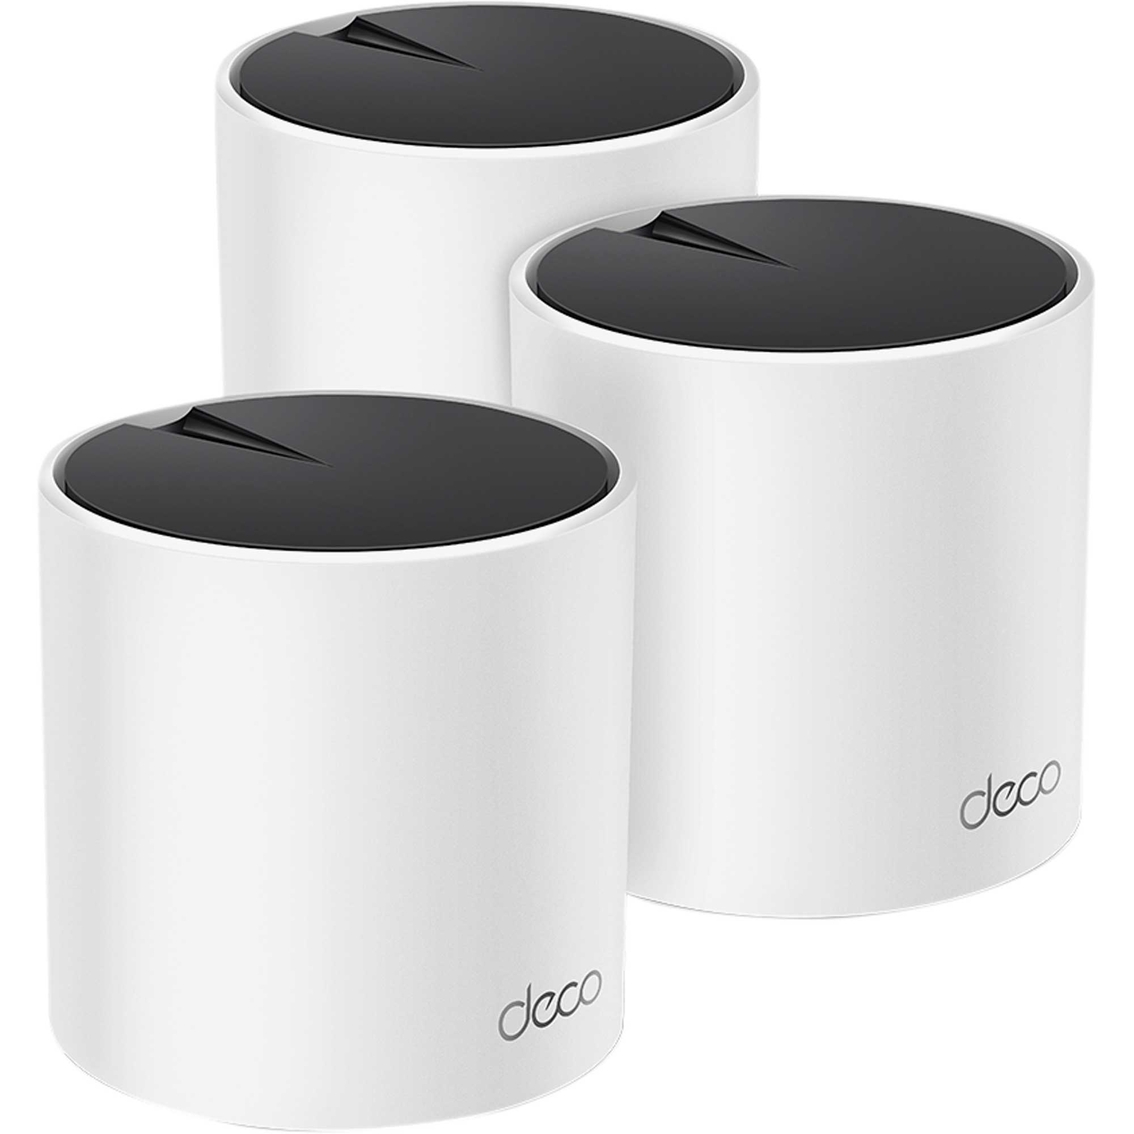 TP-Link Deco X25 AX1800 Whole Home Mesh WiFi 6 System - Image 2 of 2